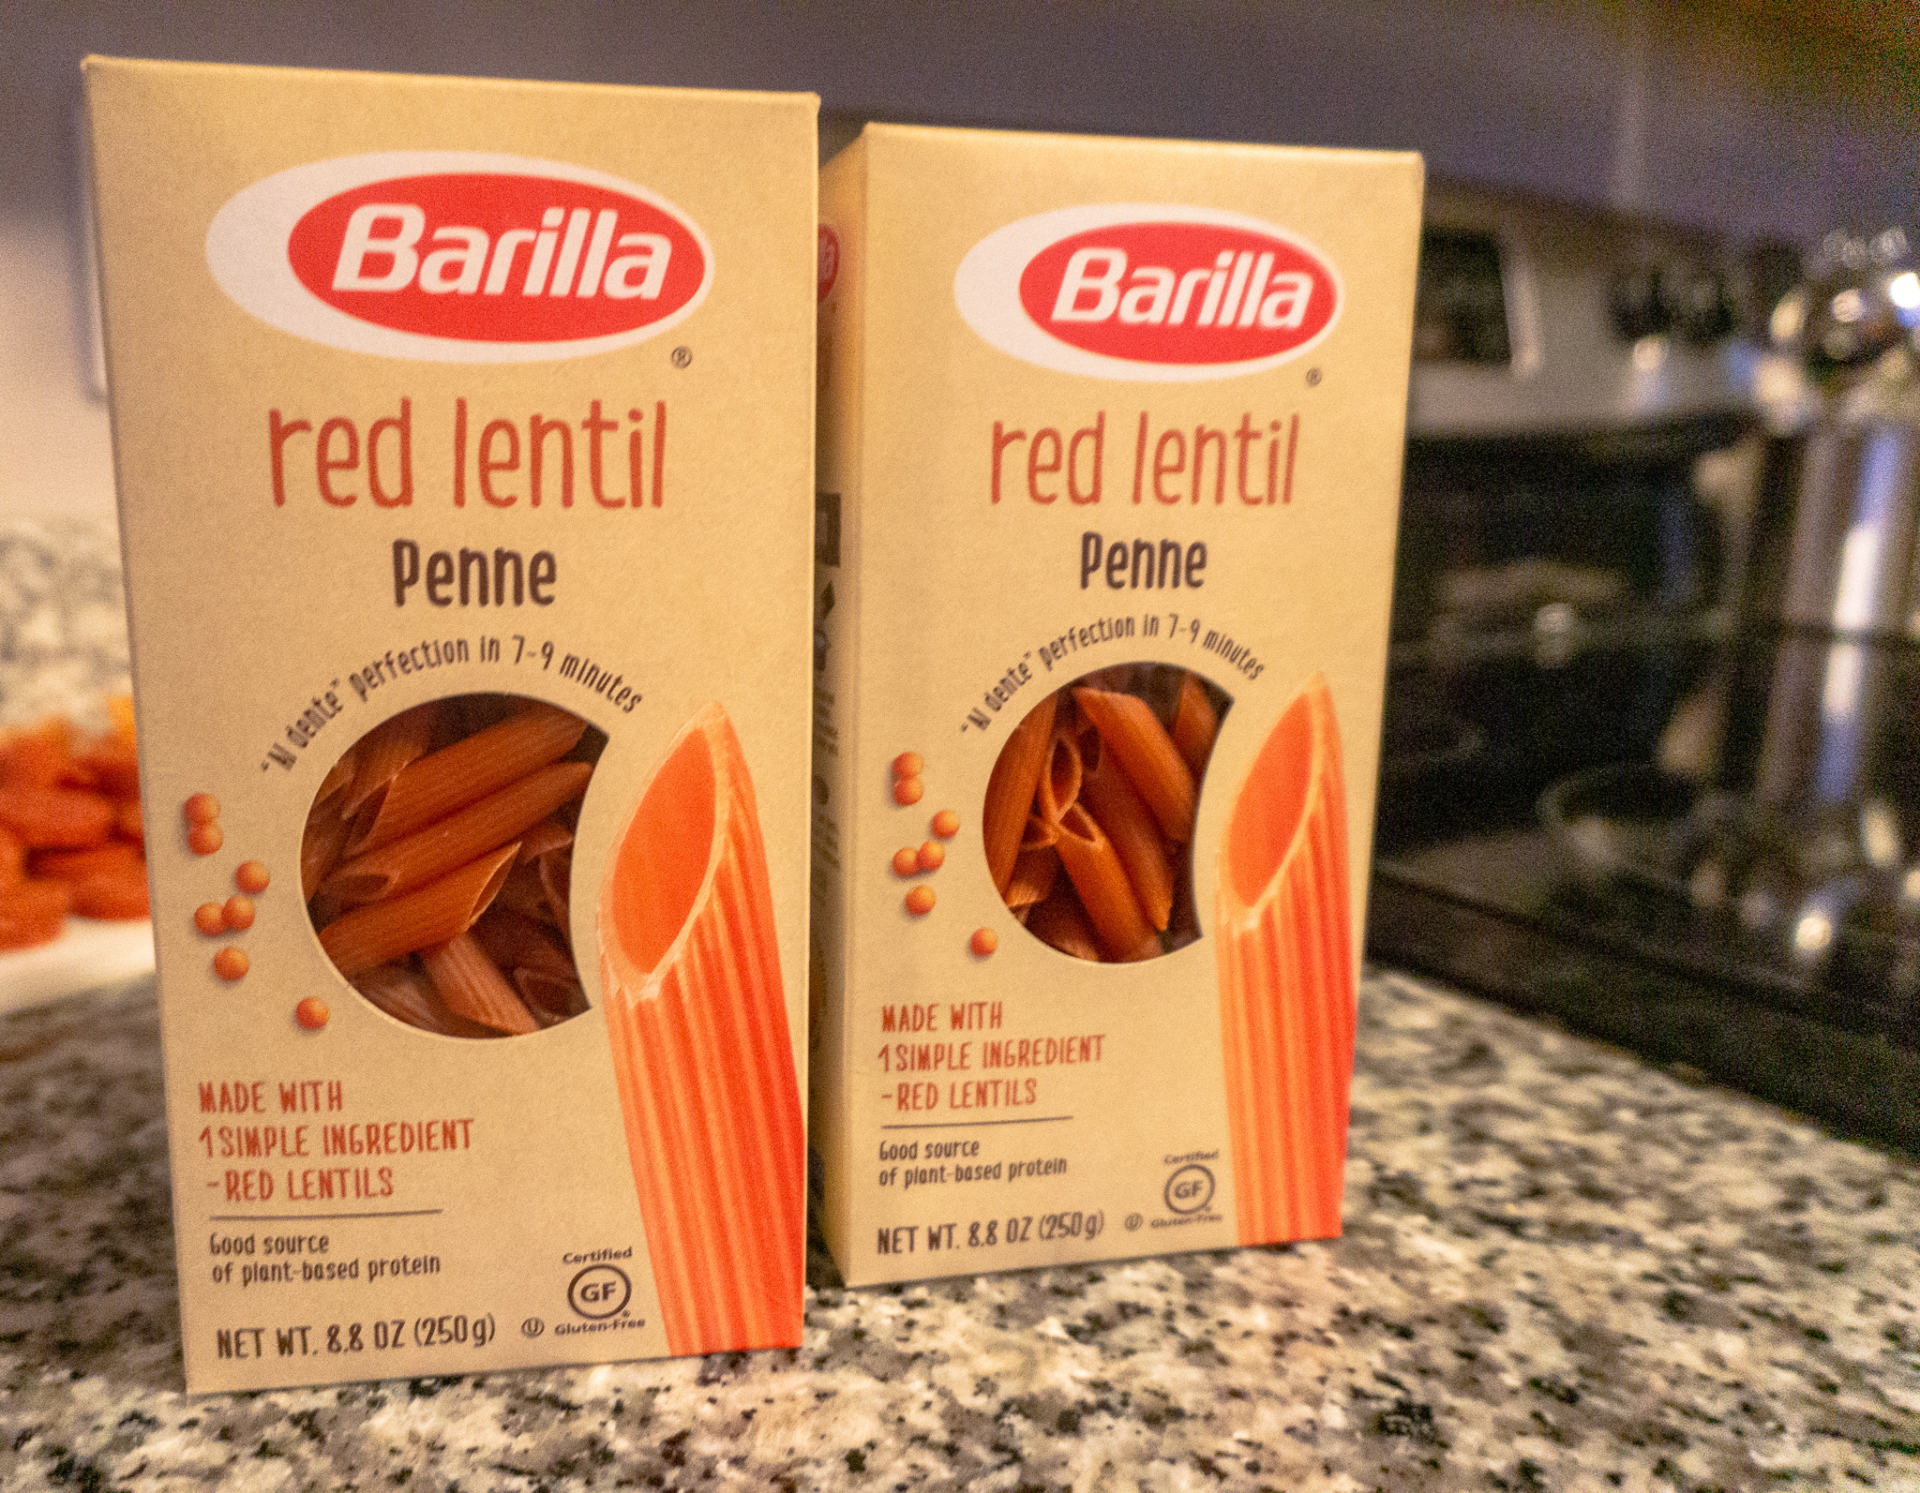 aldente cooking time for red lenil pasta